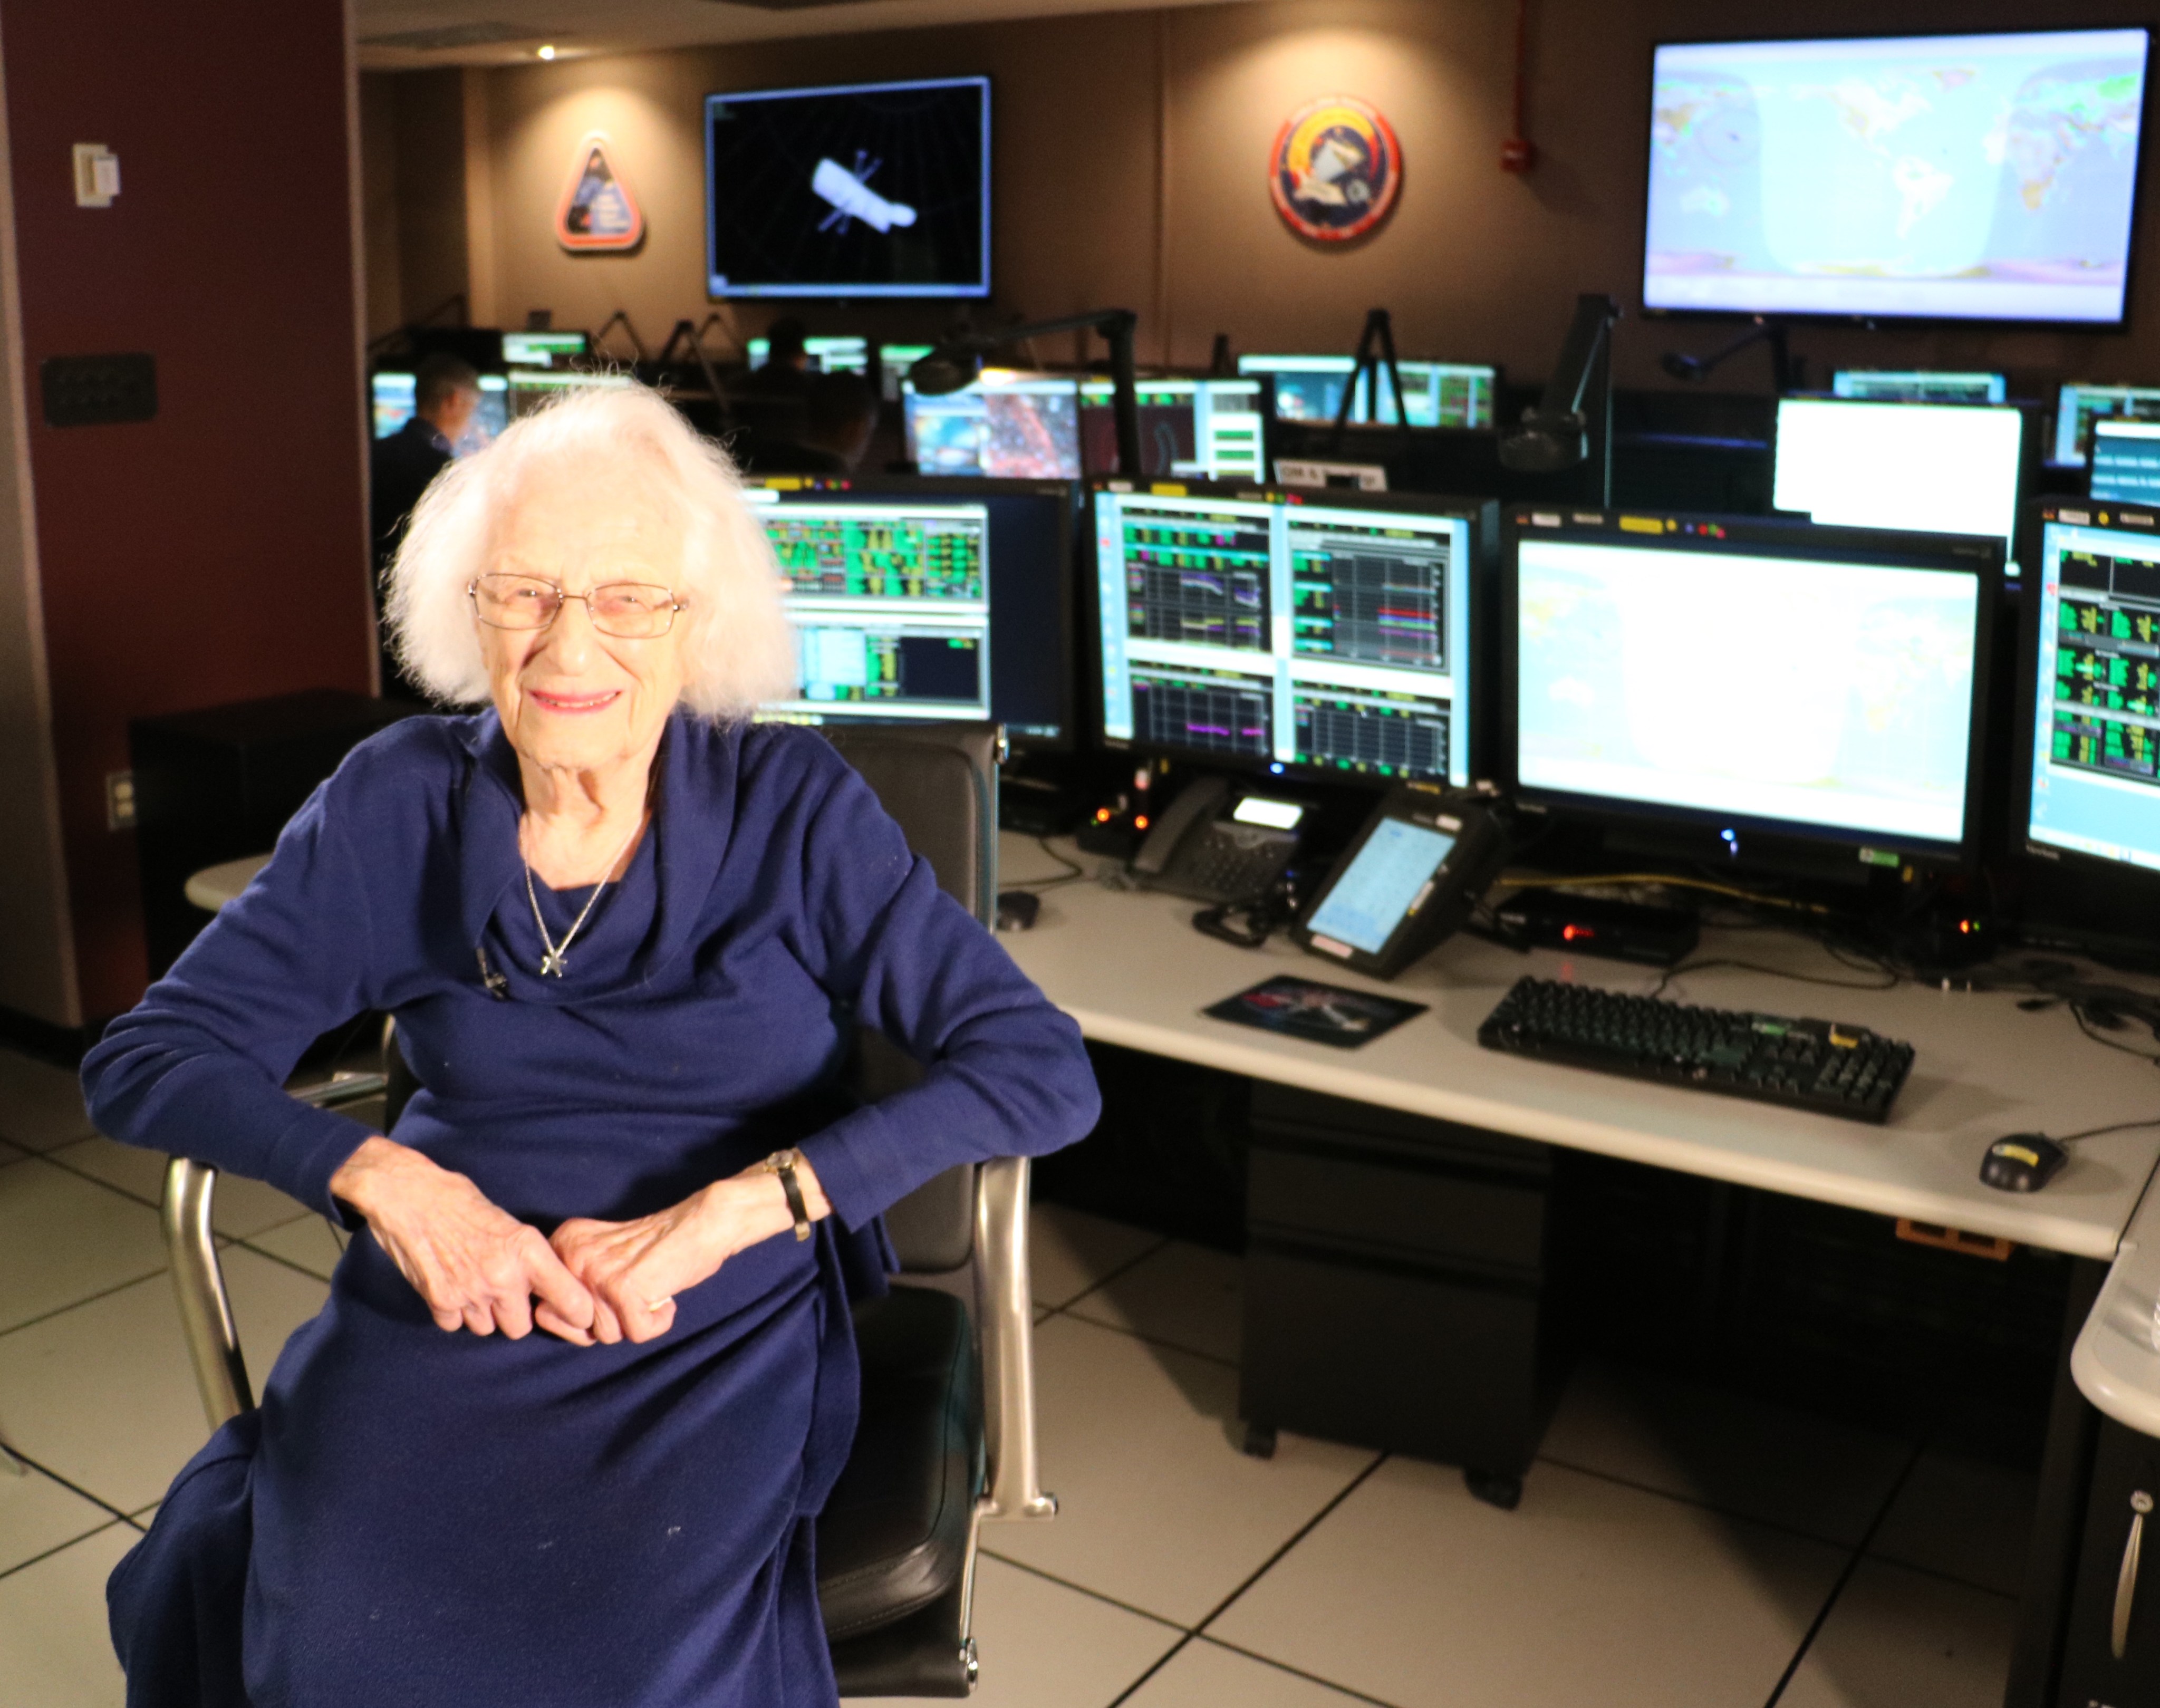 Nancy Grace Roman in a blue outfit and glasses smiles as she sits in a chair in the Hubble control room in front of desks full of computers with screens showing Hubble data.